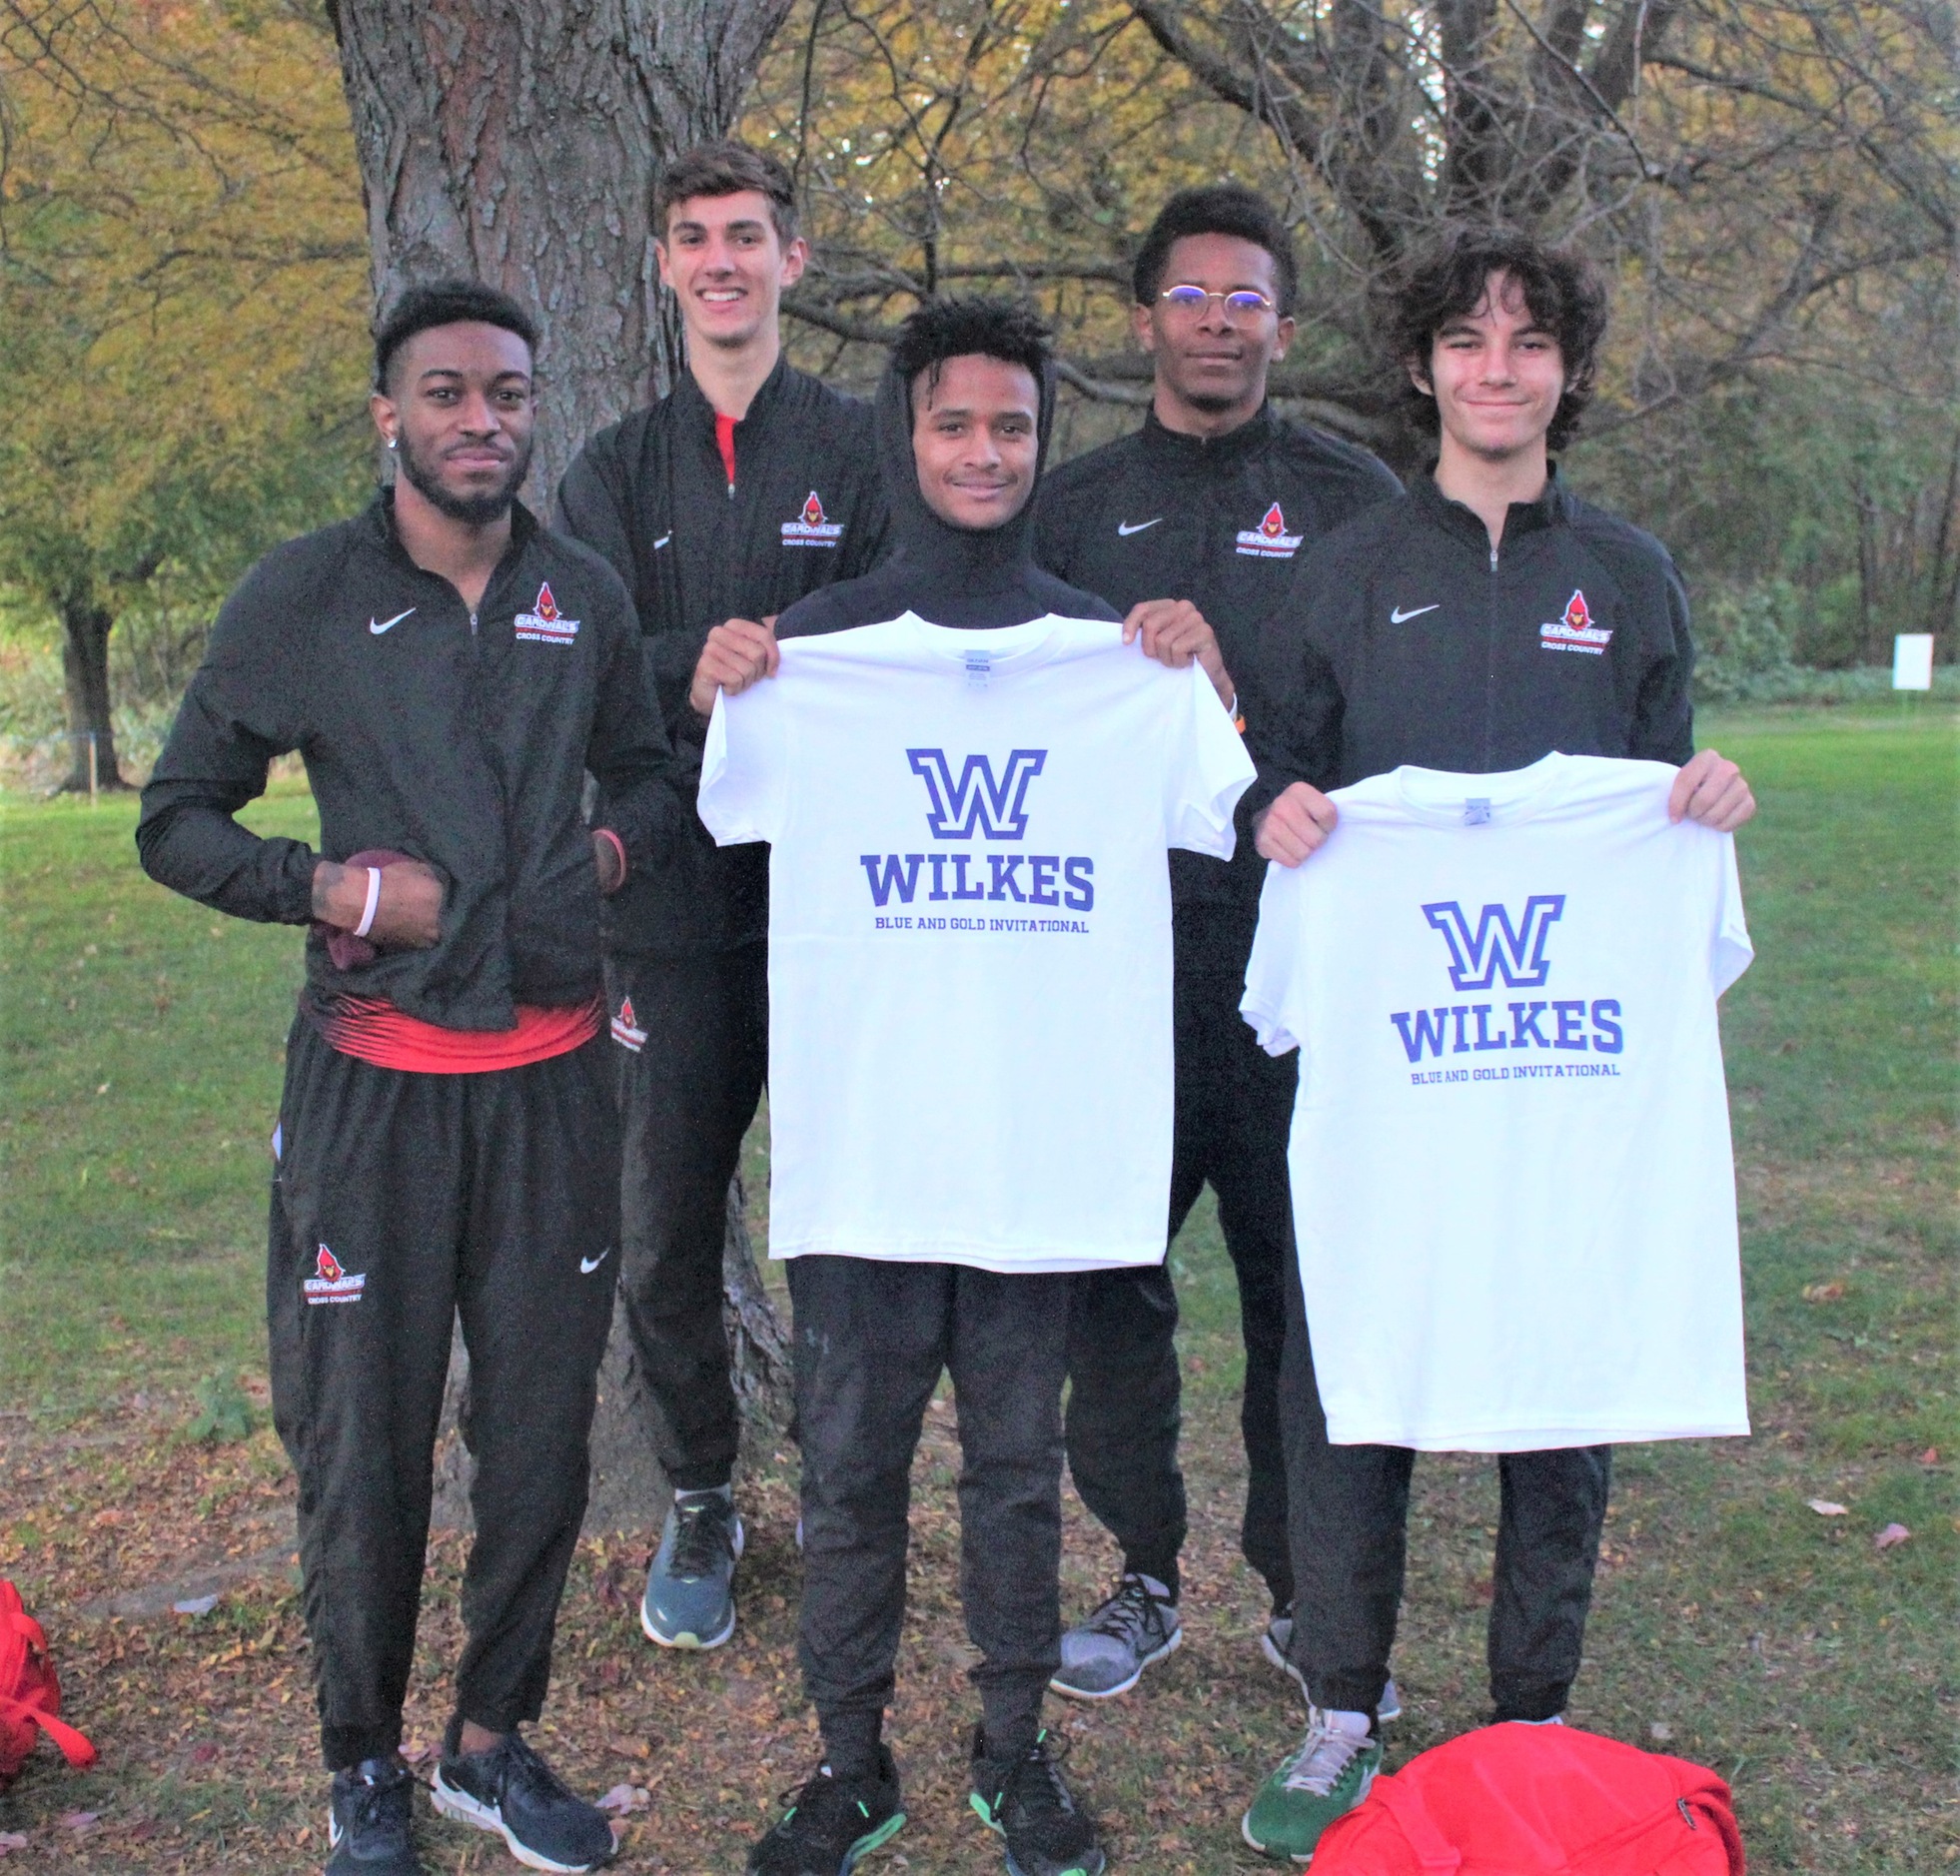 Cardinals Cross-Country Places 4th at Wilkes University in PA